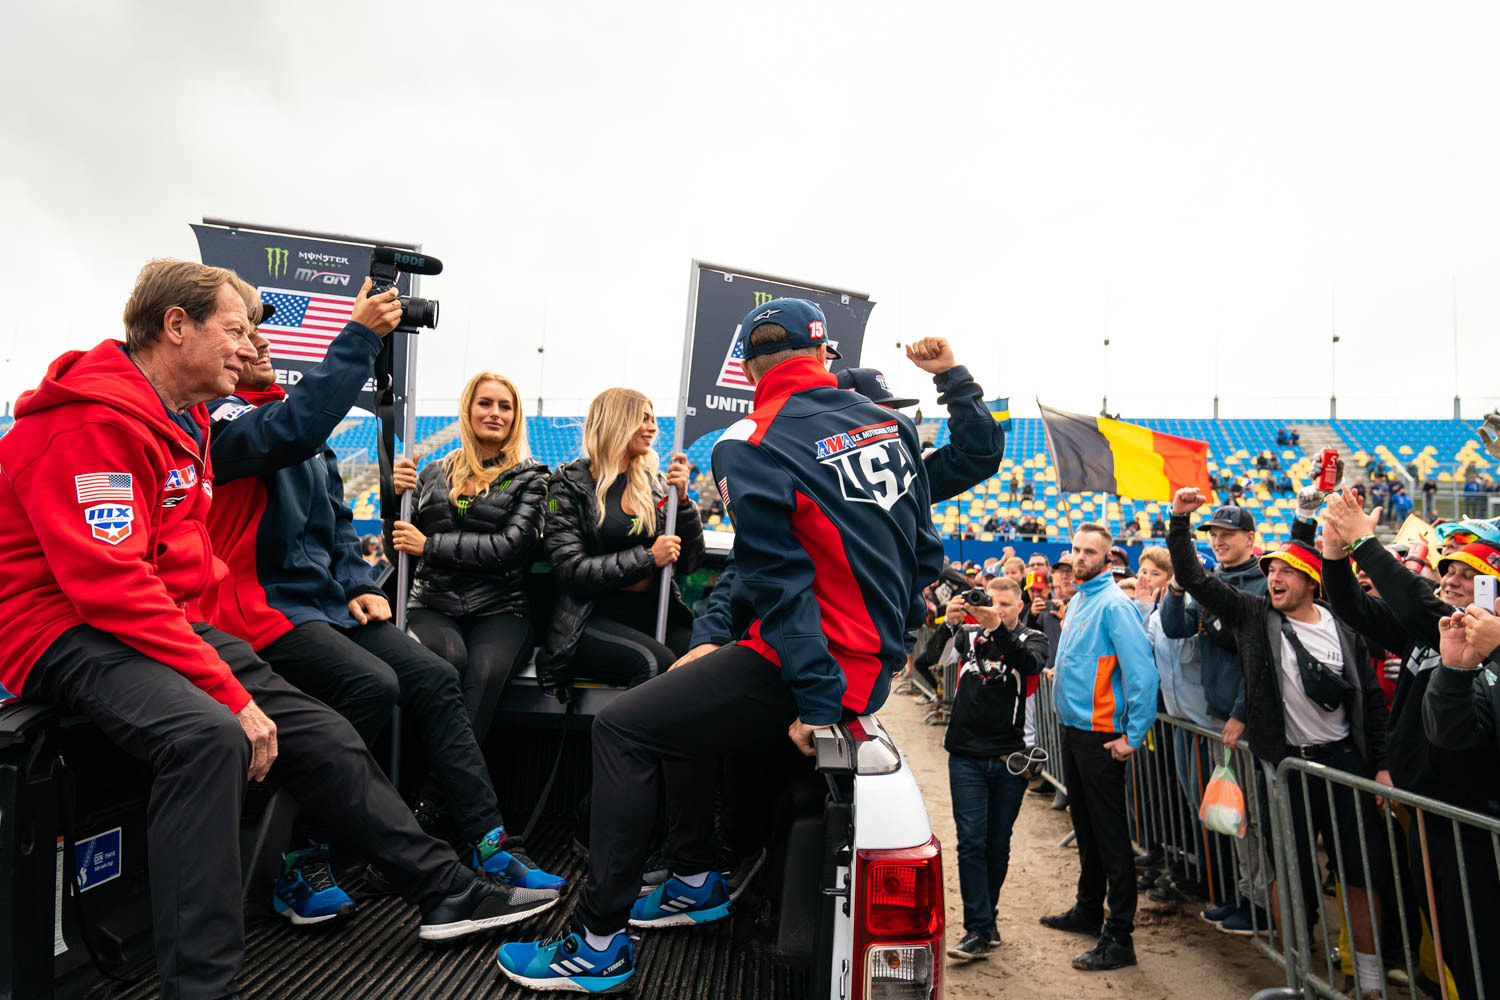 2021 Motocross Of Nations AMA and Team USA Confirm Participation